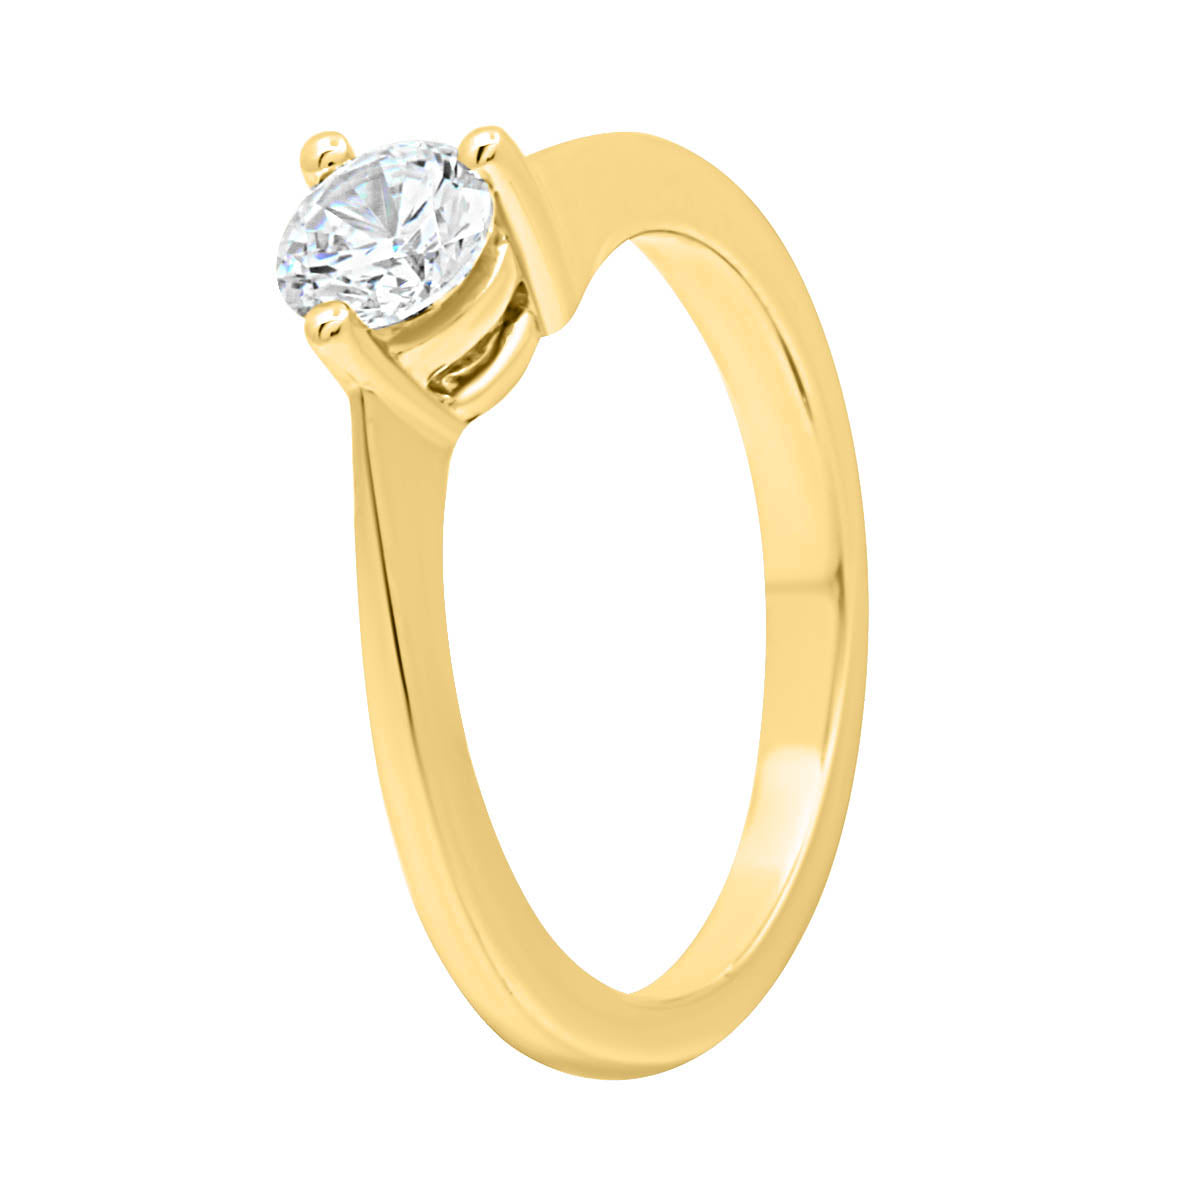 Three Claw Engagement Ring in yellow gold at an upright angled position